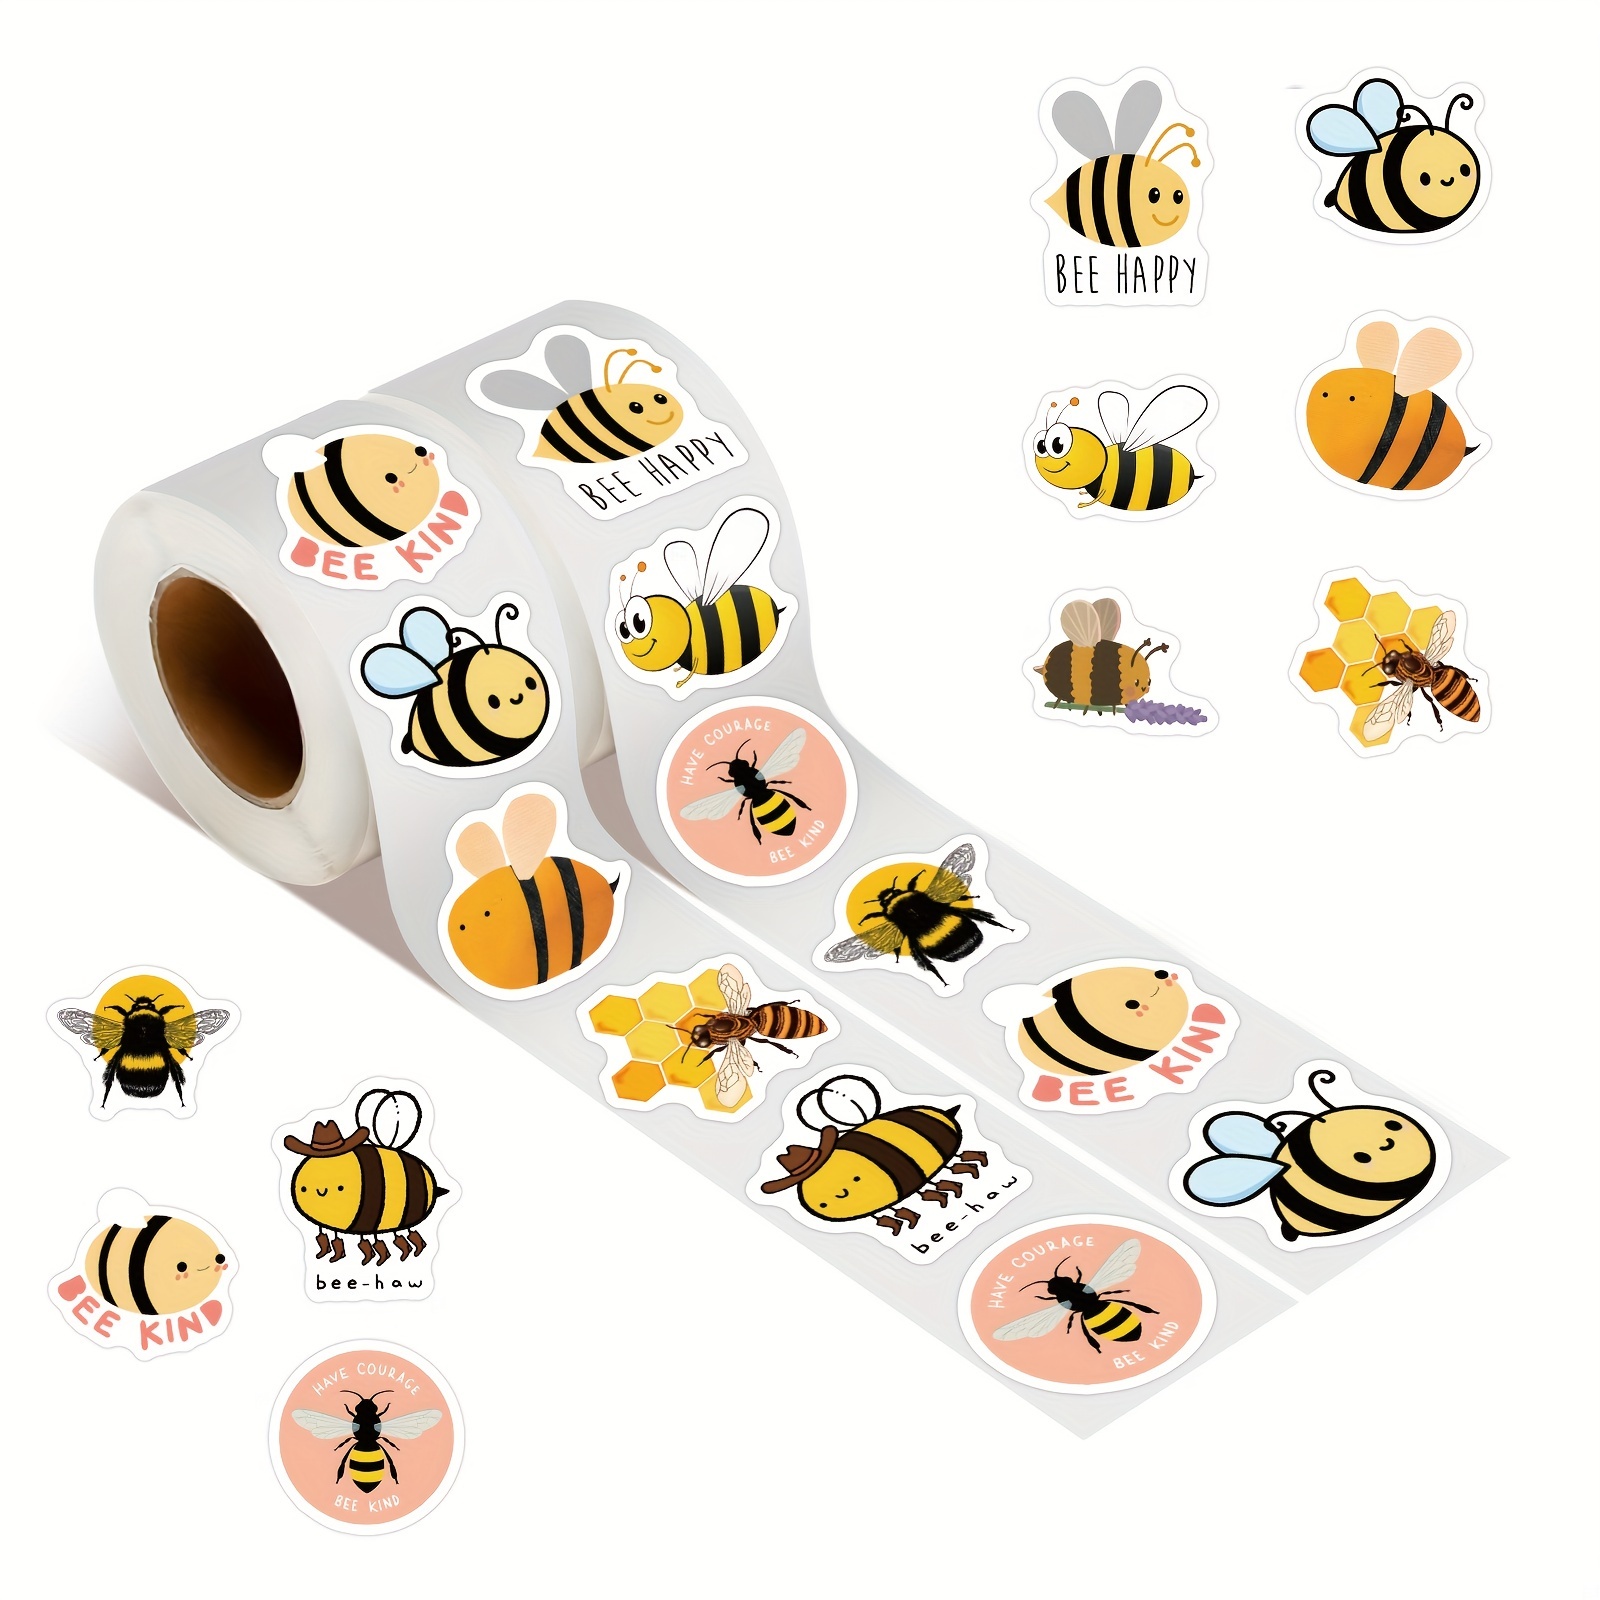 Christmas decorations 24PCS 3D Bee Stickers Bee Decor Removable Mural  Decals Honey Bee Clings For Home Office Fridge Decorations Party Supplies  fall decorations for home 